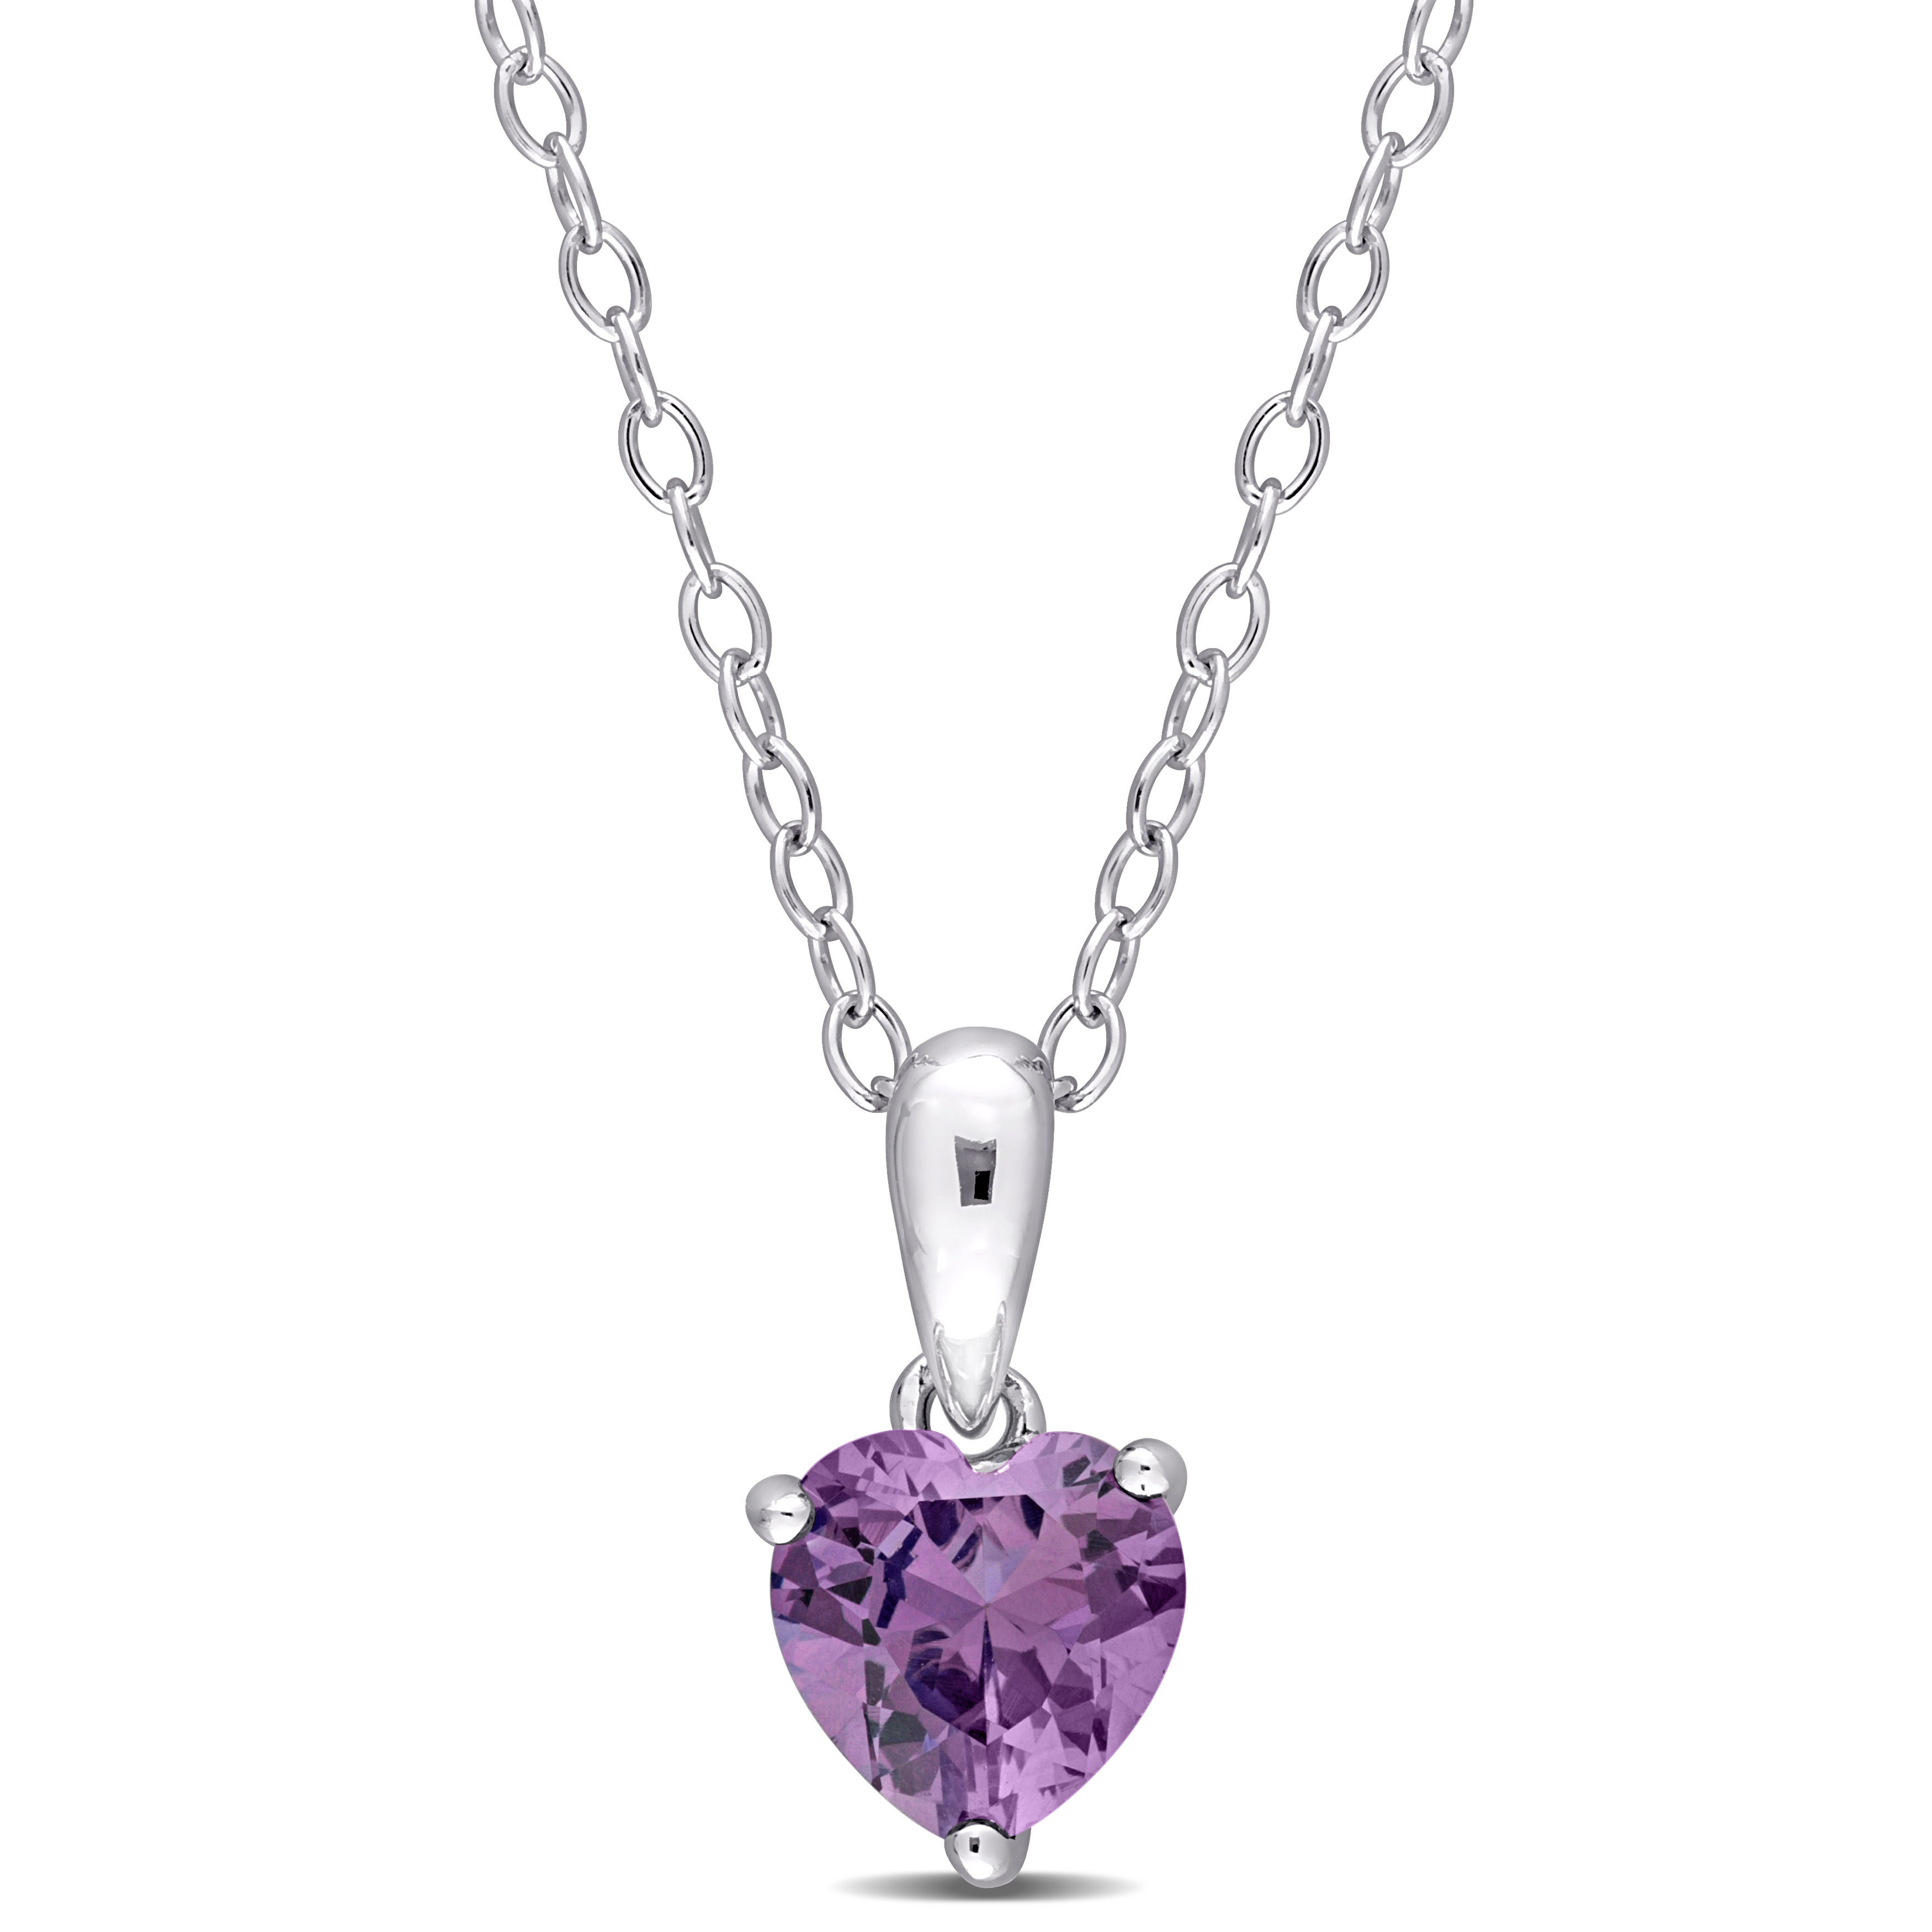 1 1/5 CT TGW Heart Shape Simulated Alexandrite Solitaire Heart Design Pendant with Chain in Sterling Silver - 18 in.